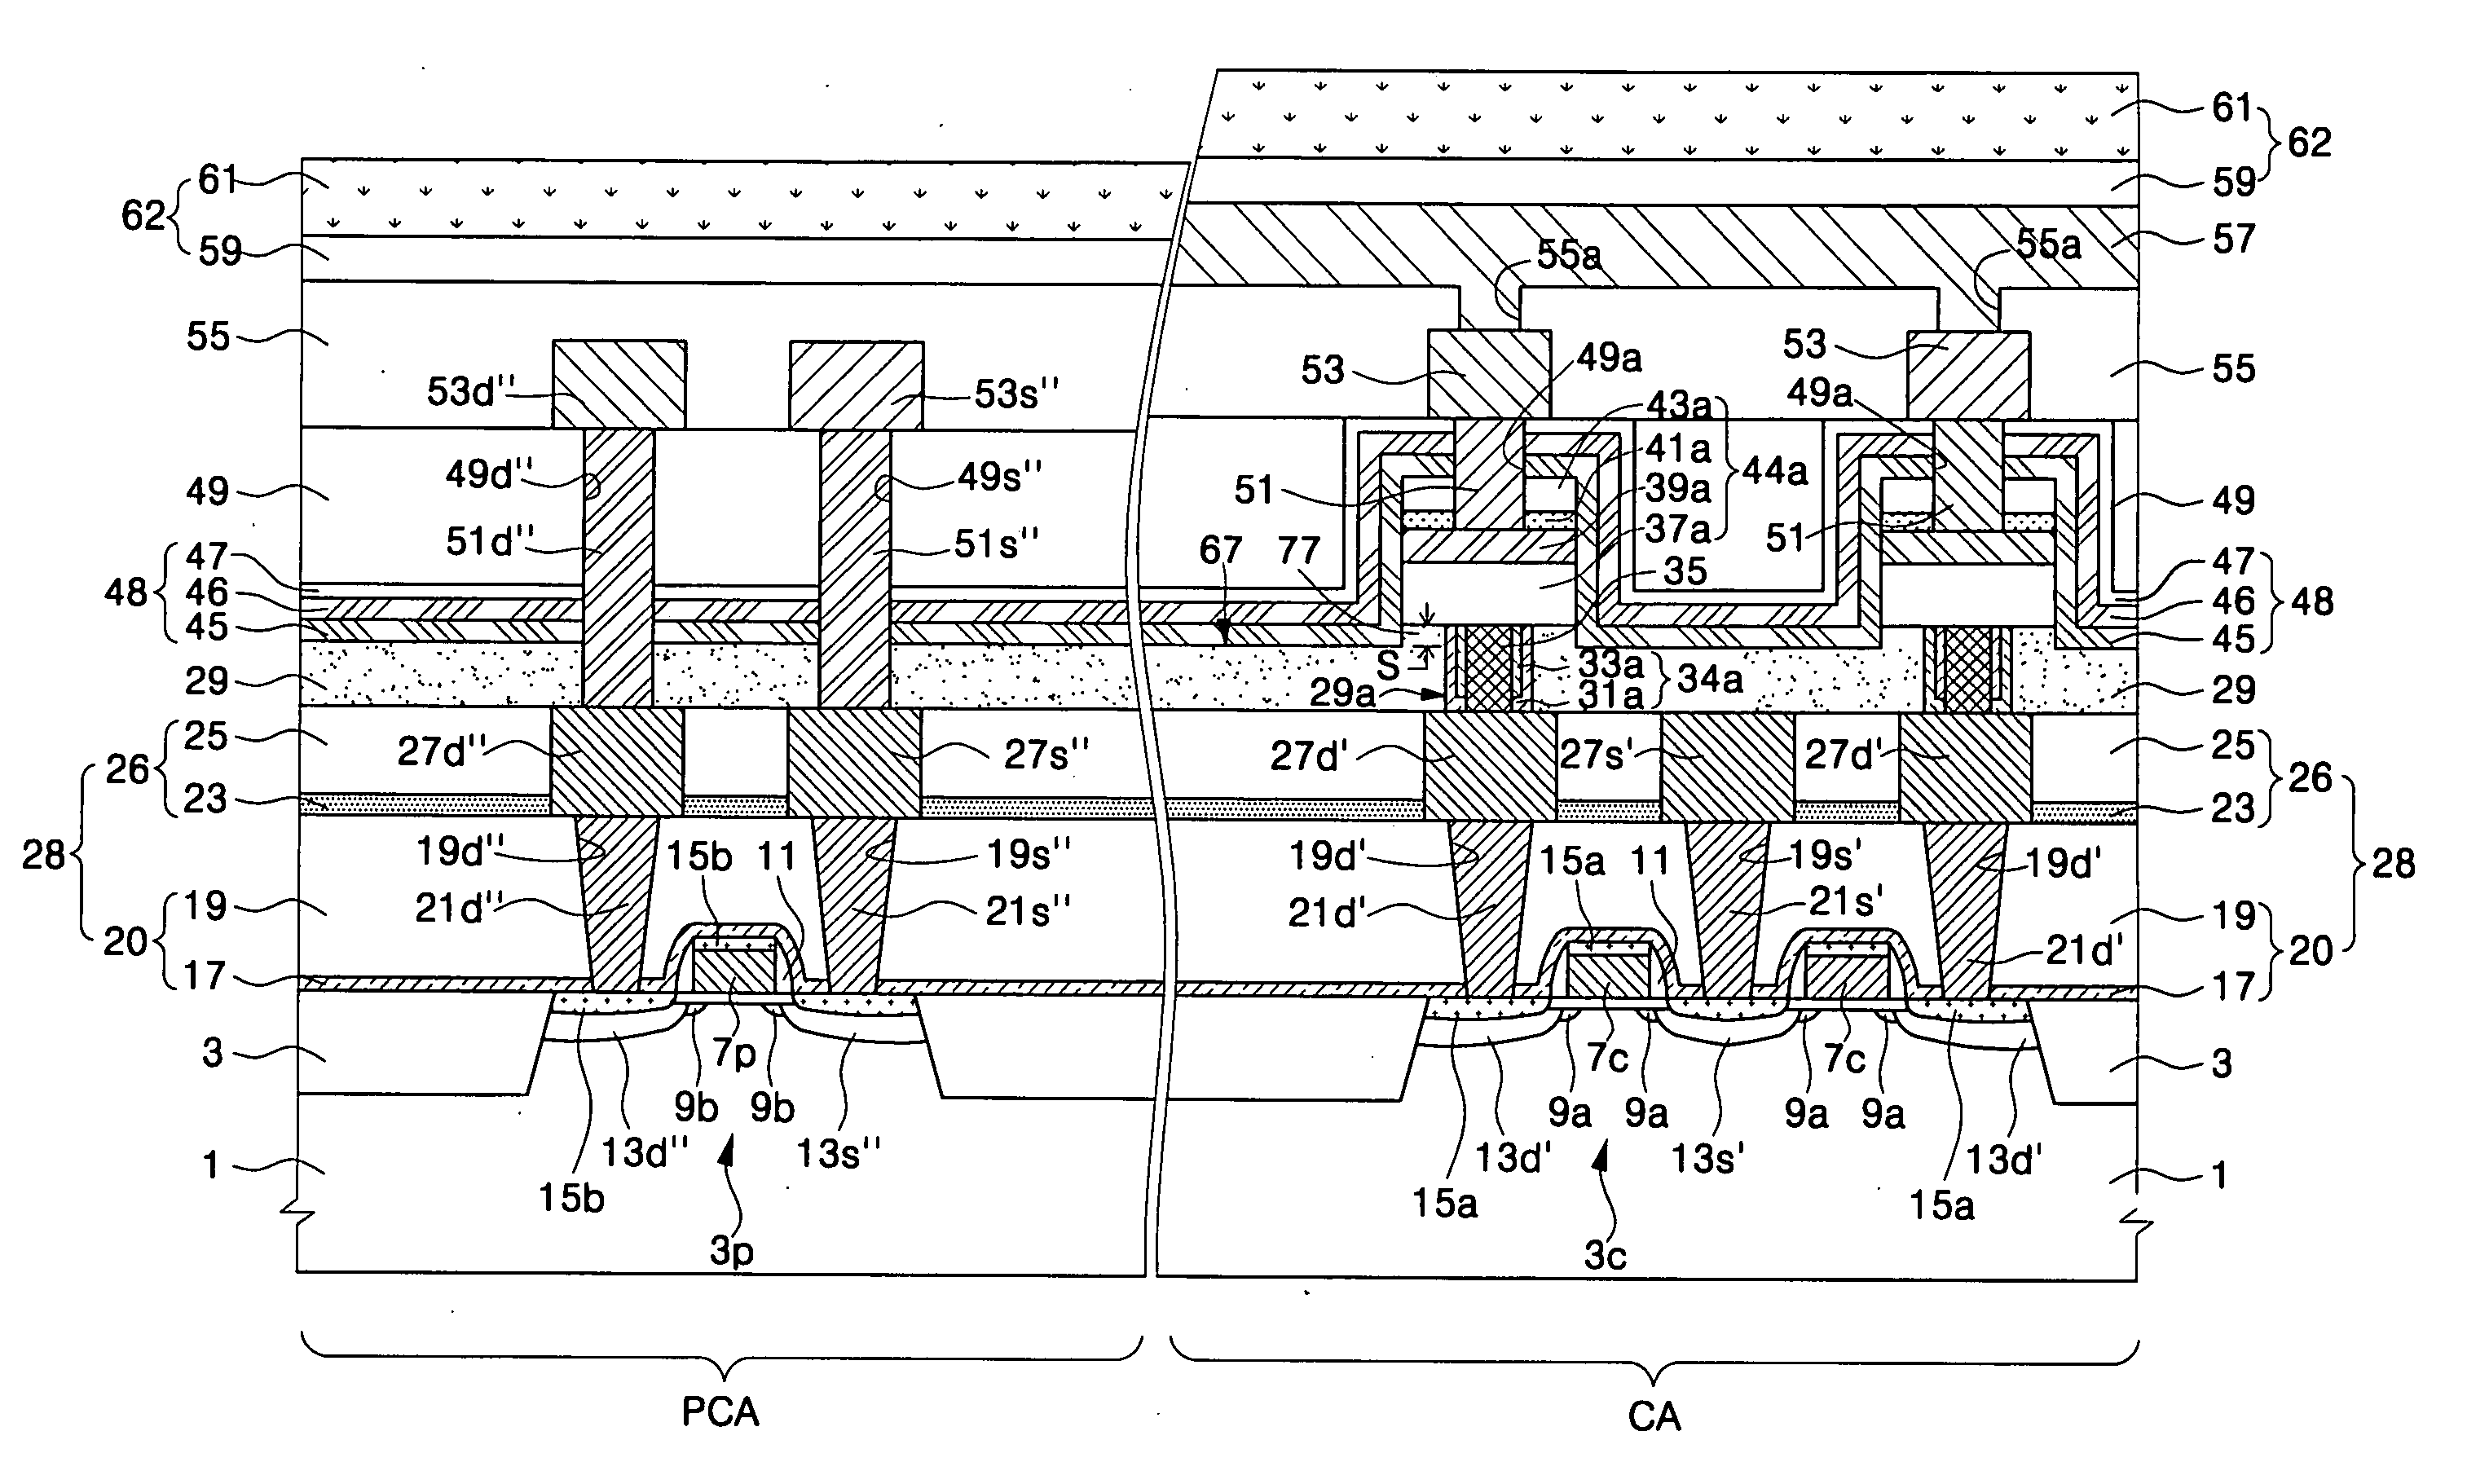 Semiconductor devices having phase change memory cells, electronic systems employing the same and methods of fabricating the same